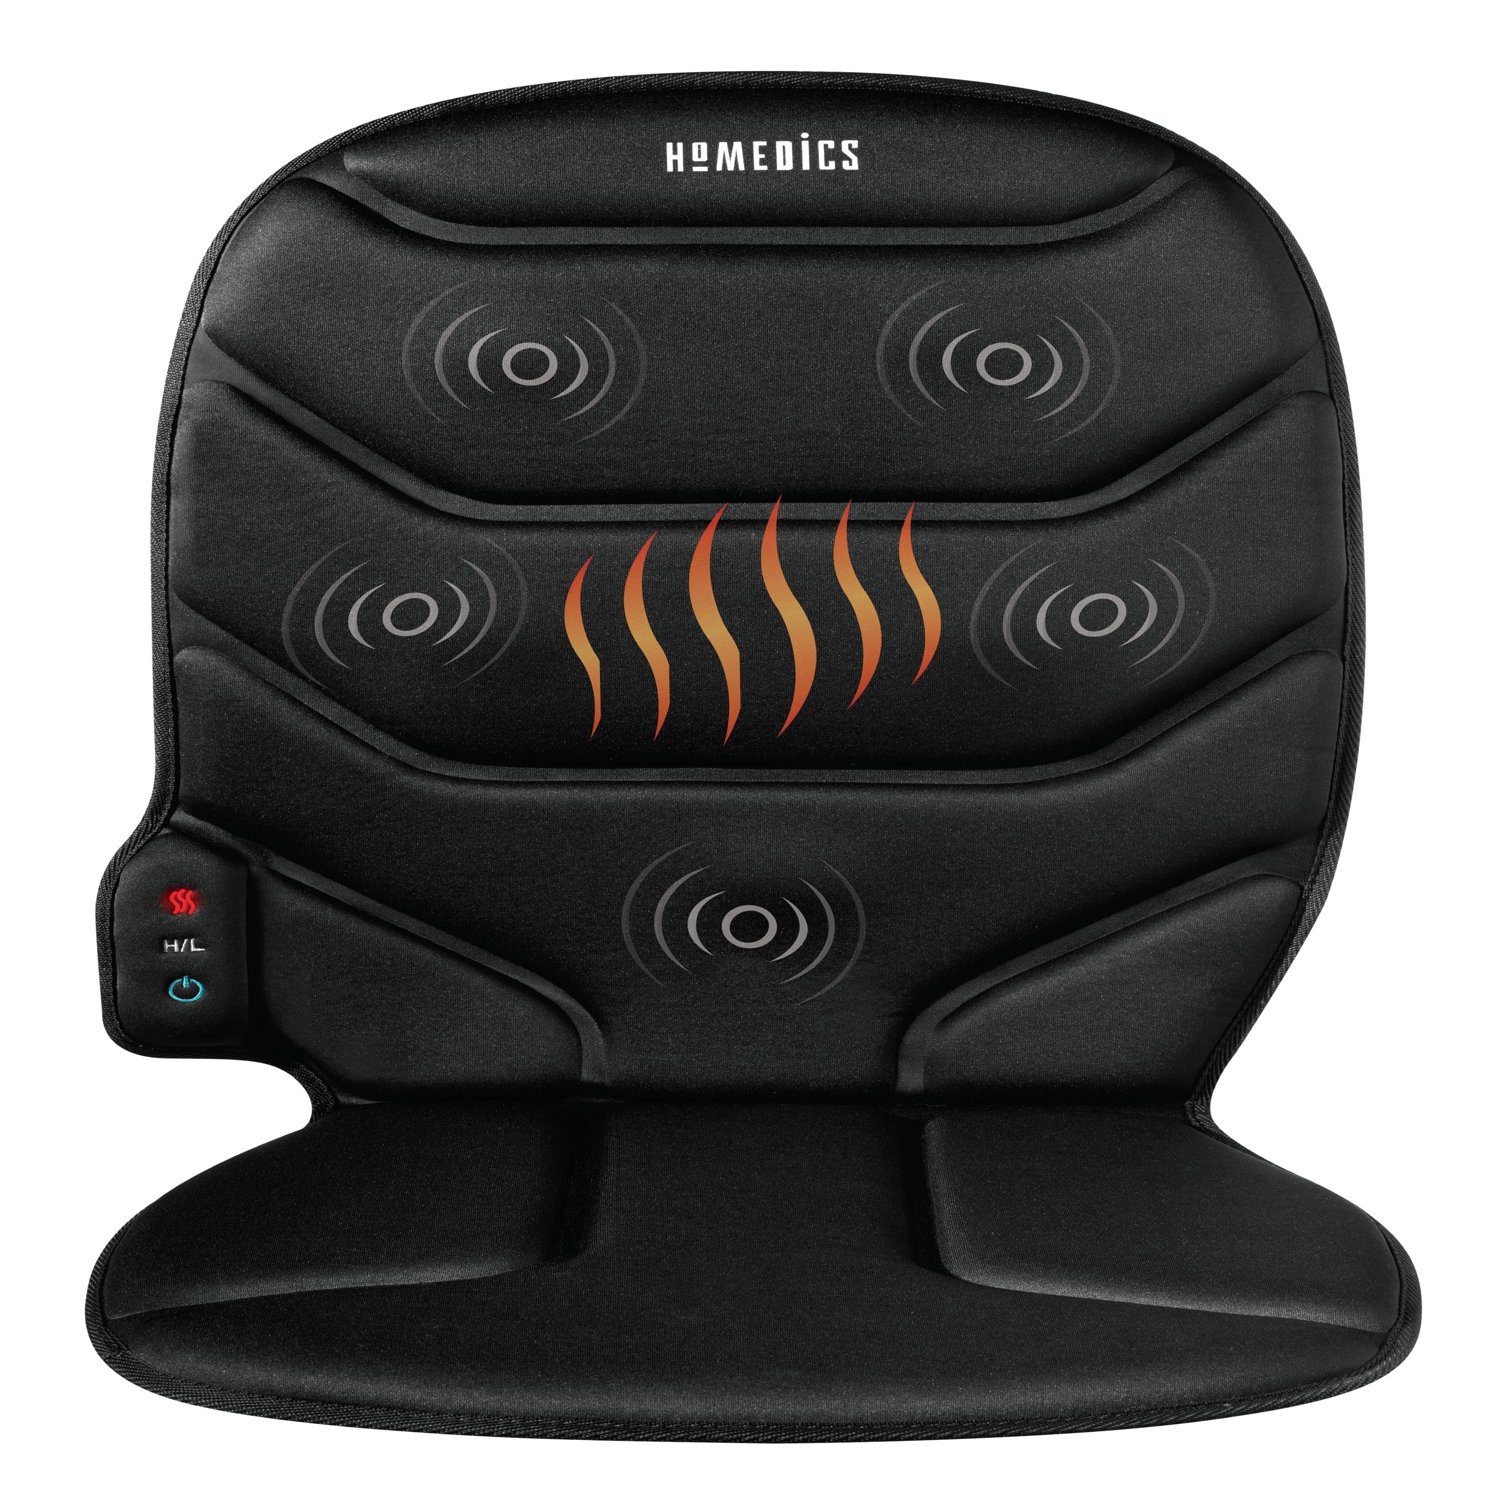 HoMedics Massage Comfort Cushion with Heat, Integrated Control for Back - image 5 of 9